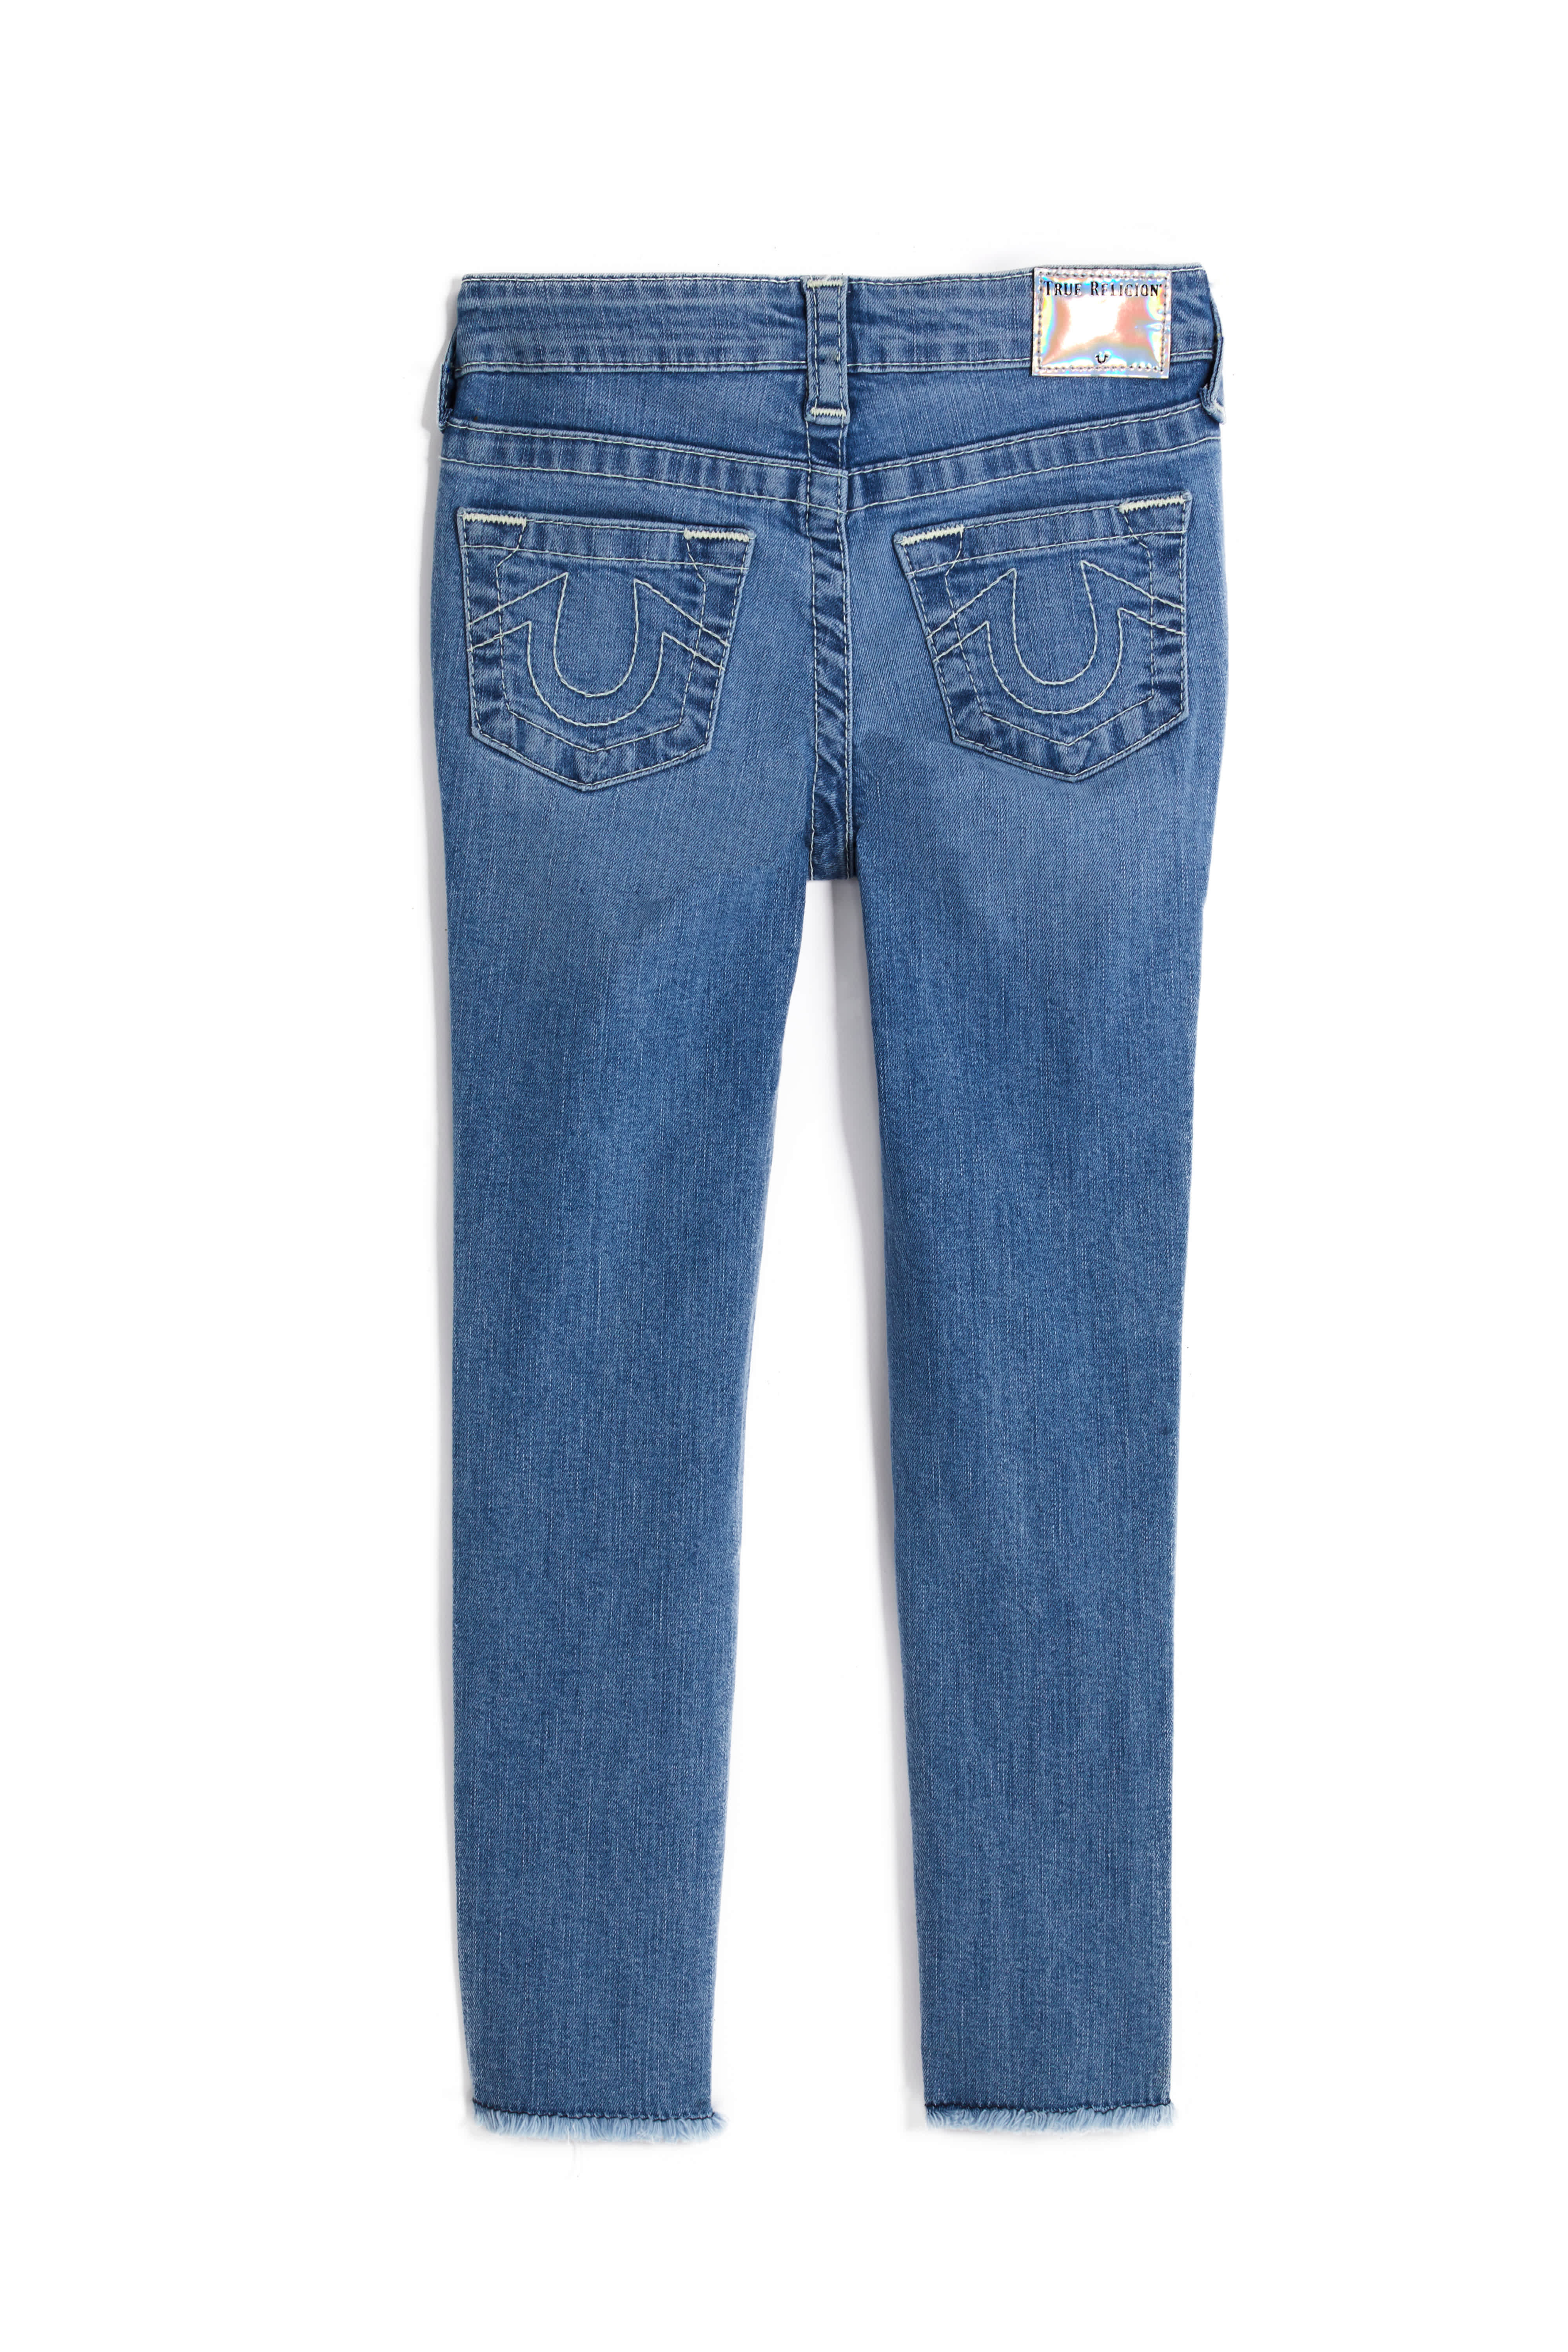 GIRLS HALLE JEANS W RIPS